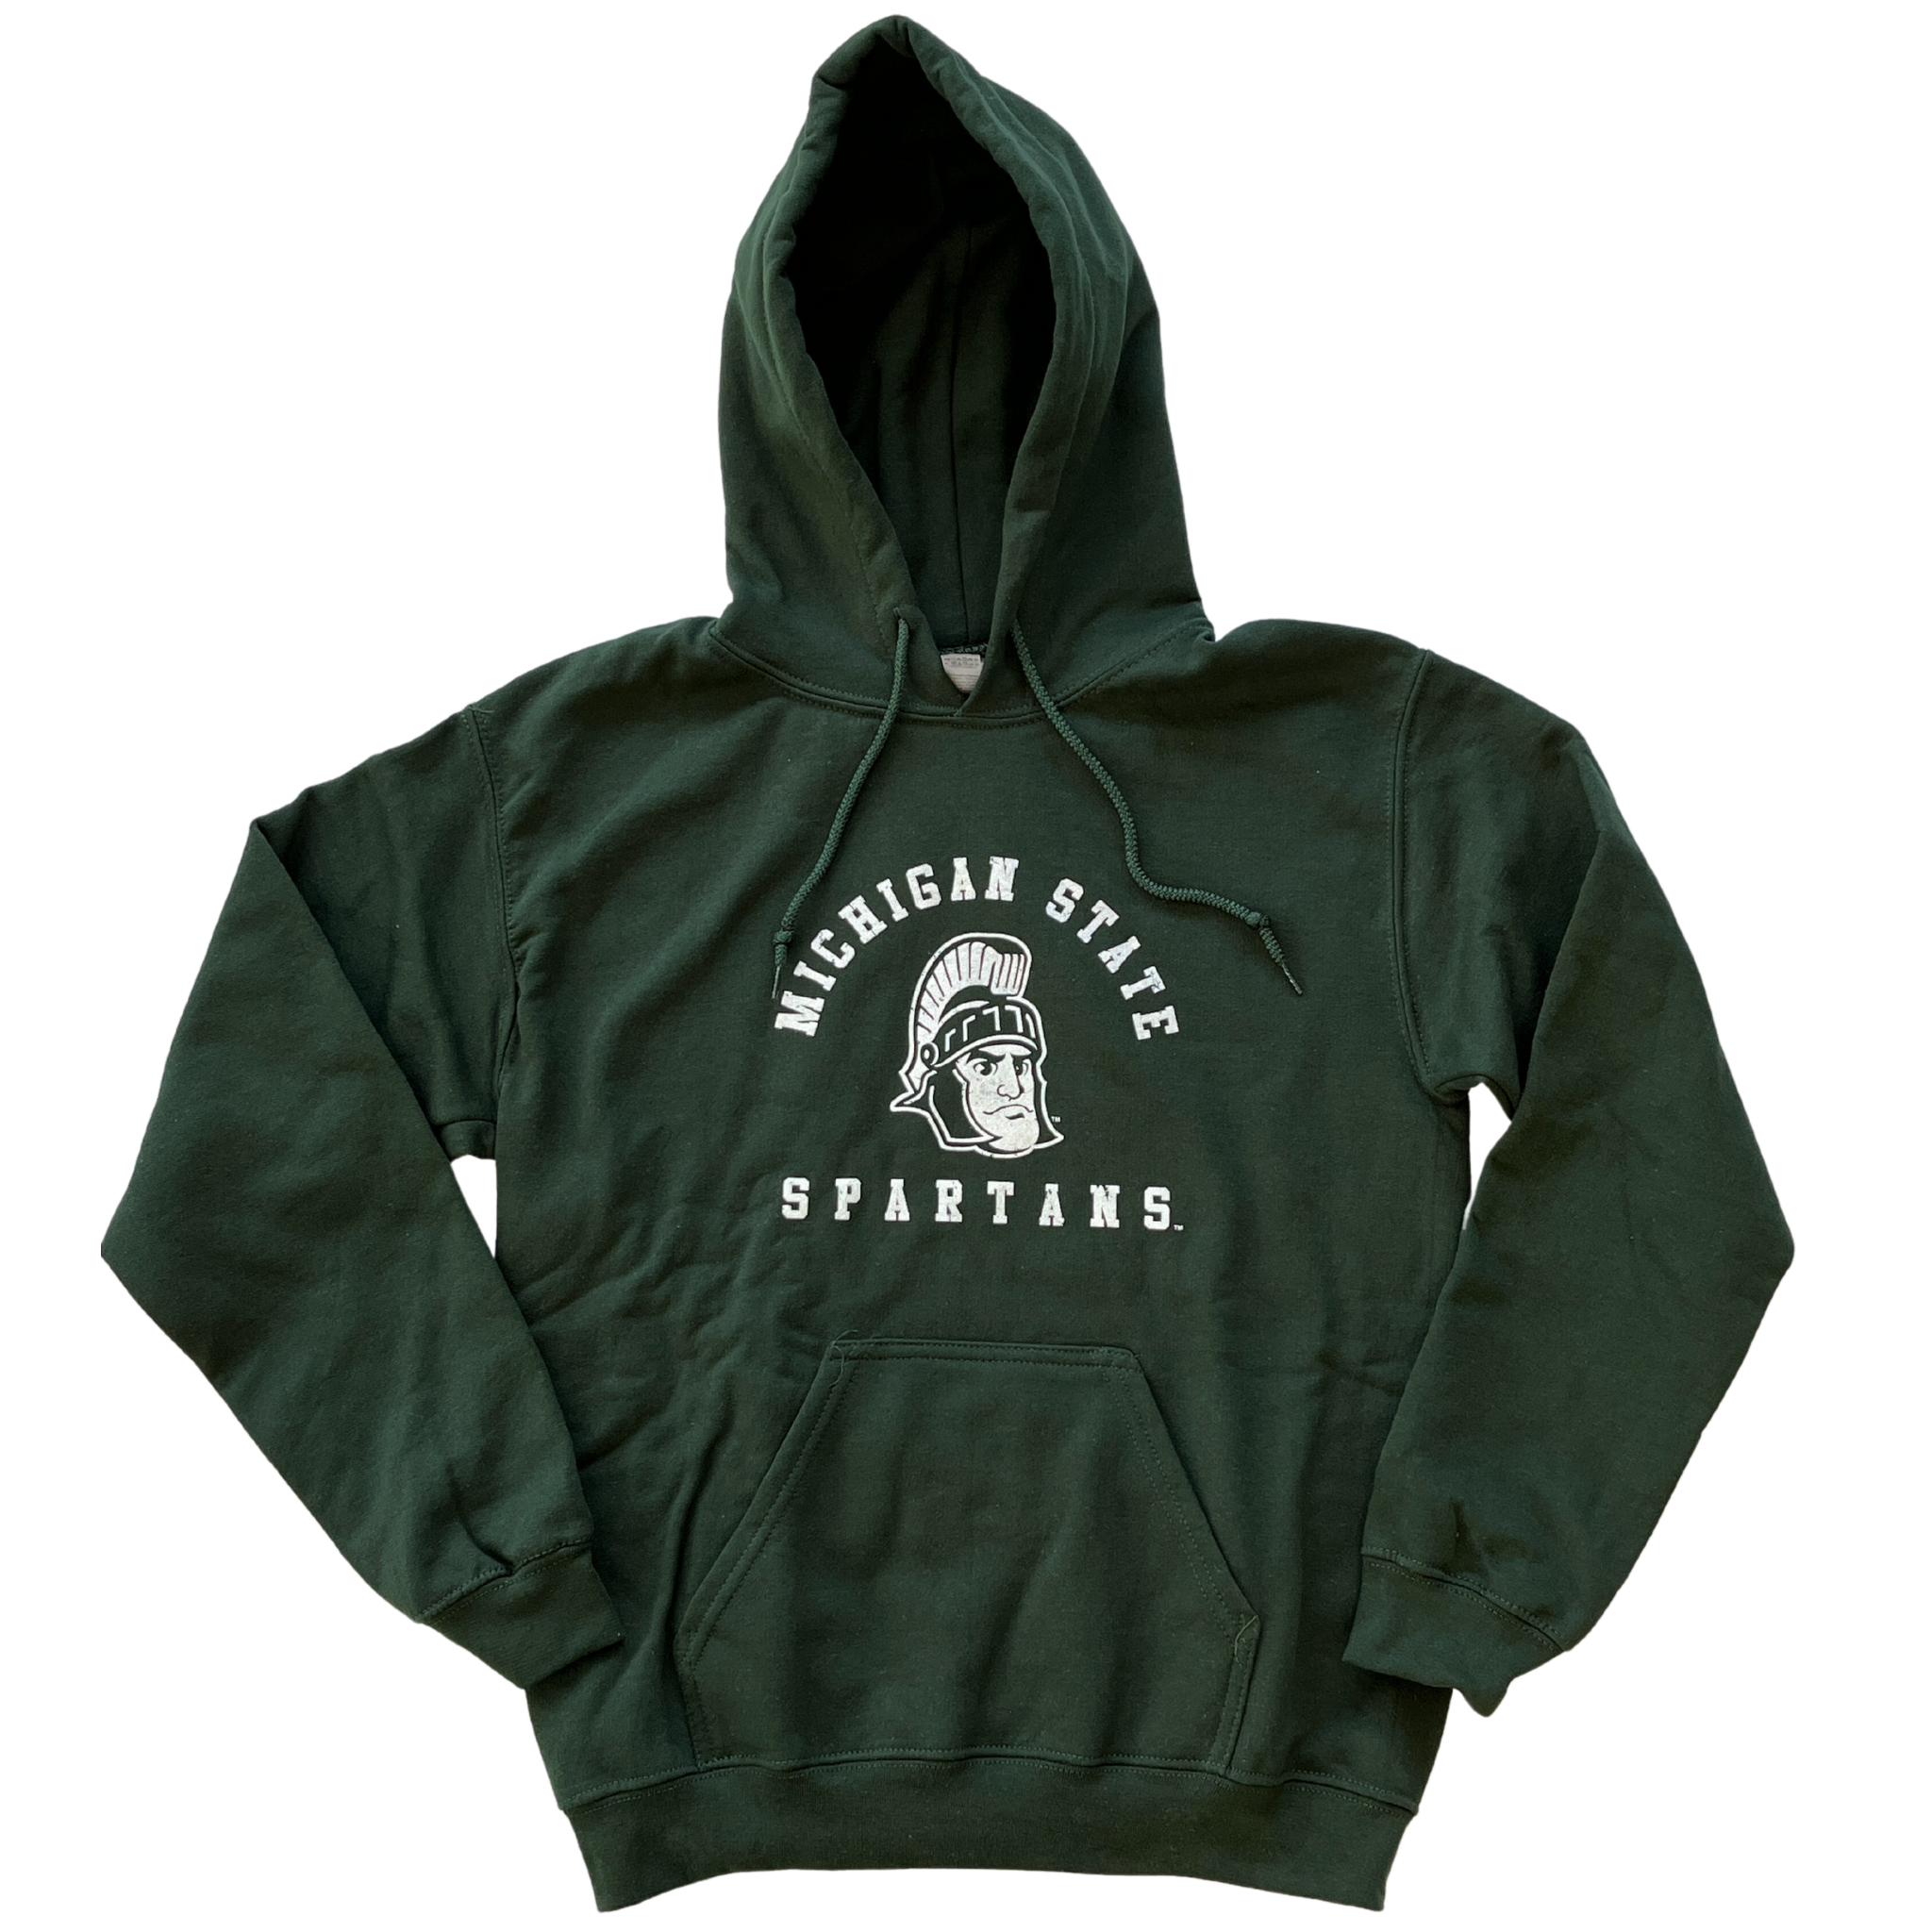 Michigan State University Spartans Hooded Sweatshirt with East Lansin